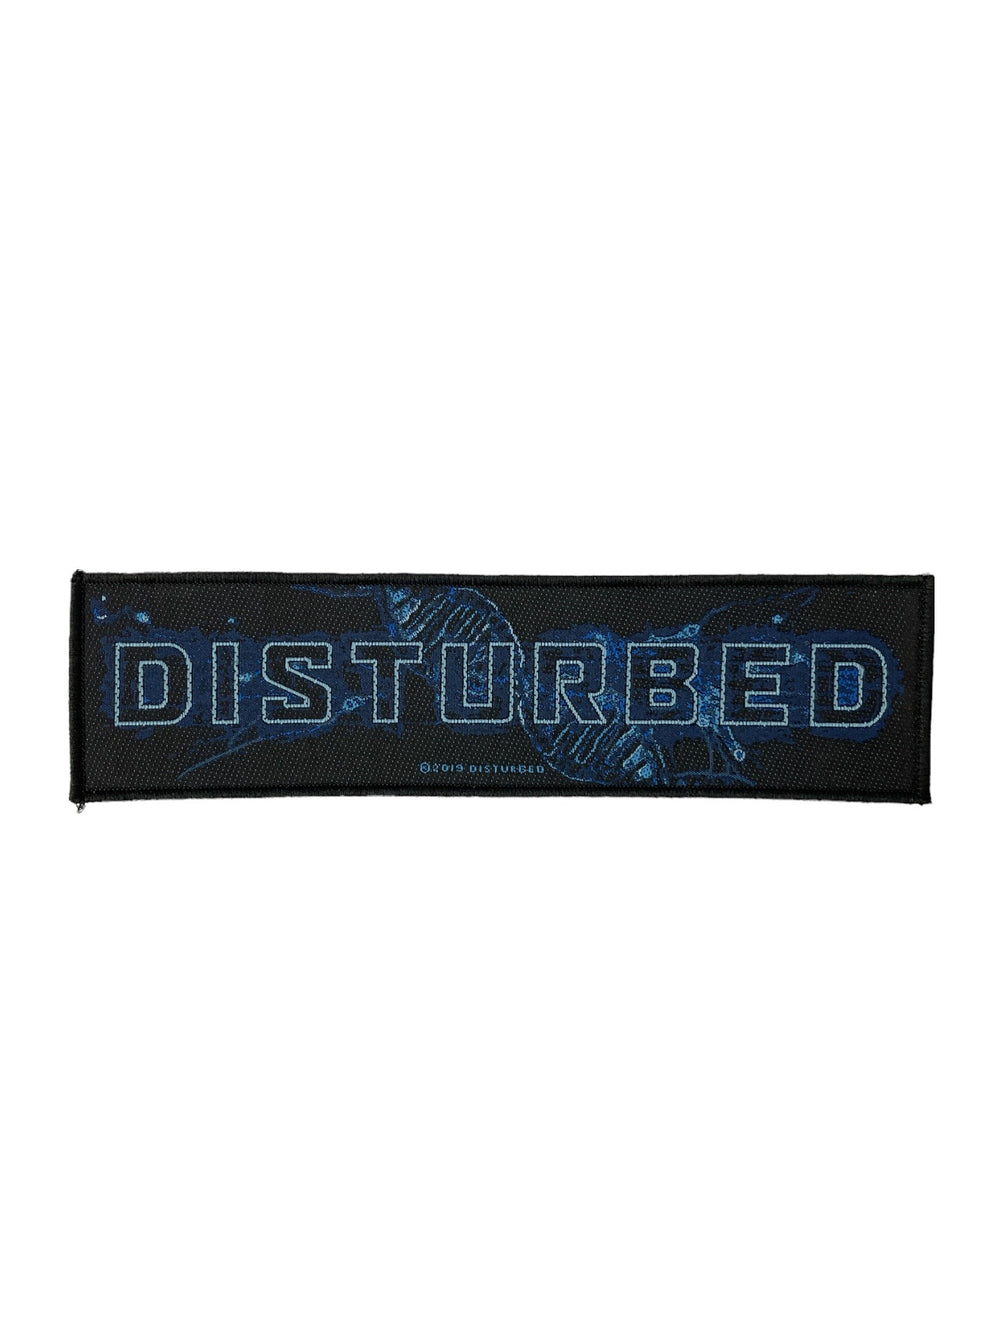 Disturbed Super Strip Patch: Blue Blood Band Name Official Woven Patch Brand New